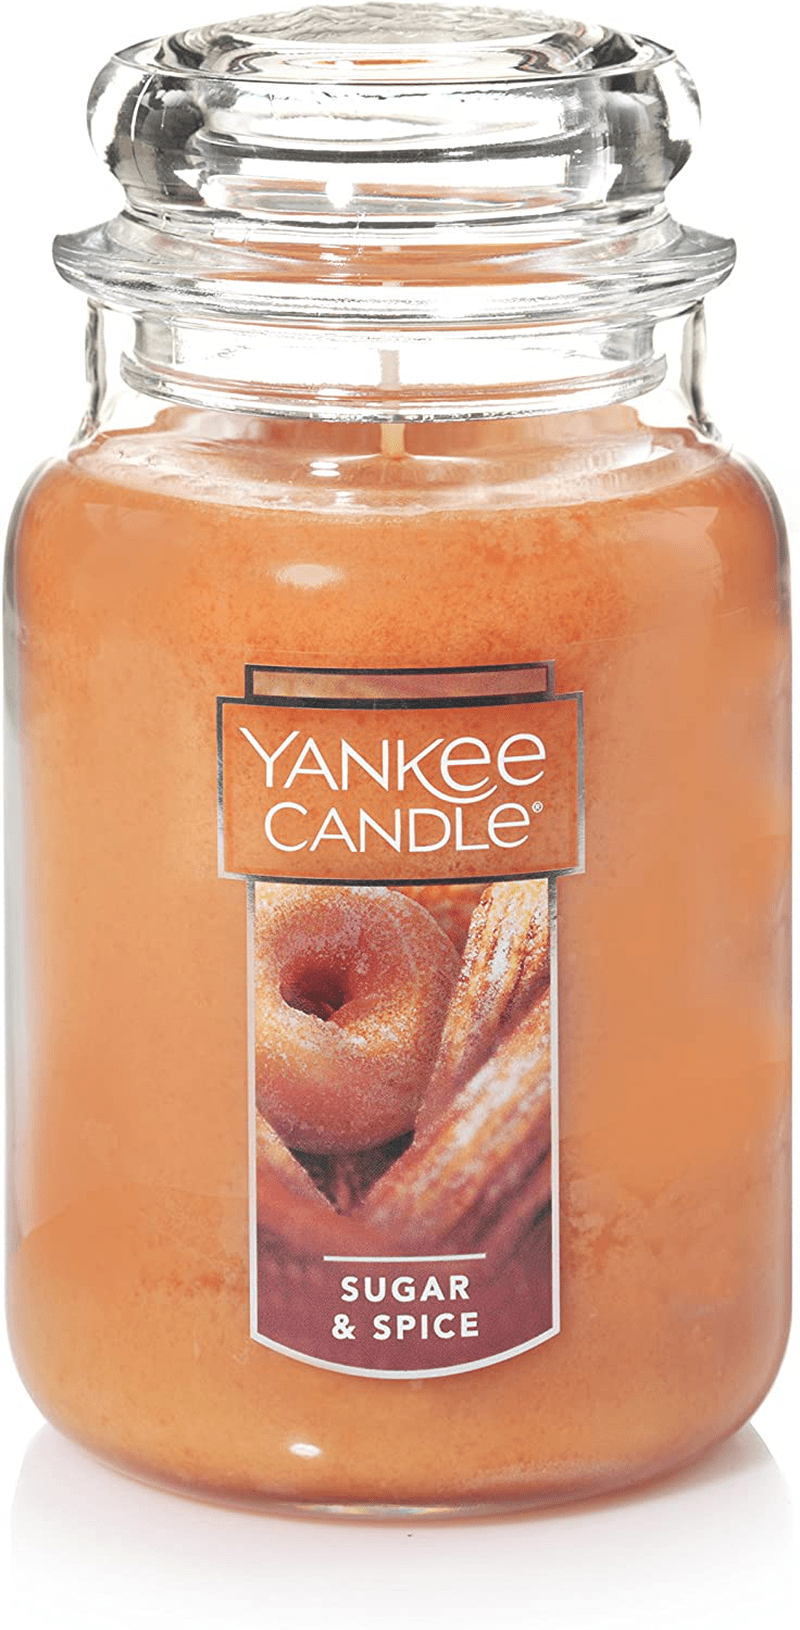 Yankee Candle Large Jar Candle Home Sweet Home Home & Garden > Decor > Home Fragrances > Candles Yankee Candle Sugar & Spice Large Jar 